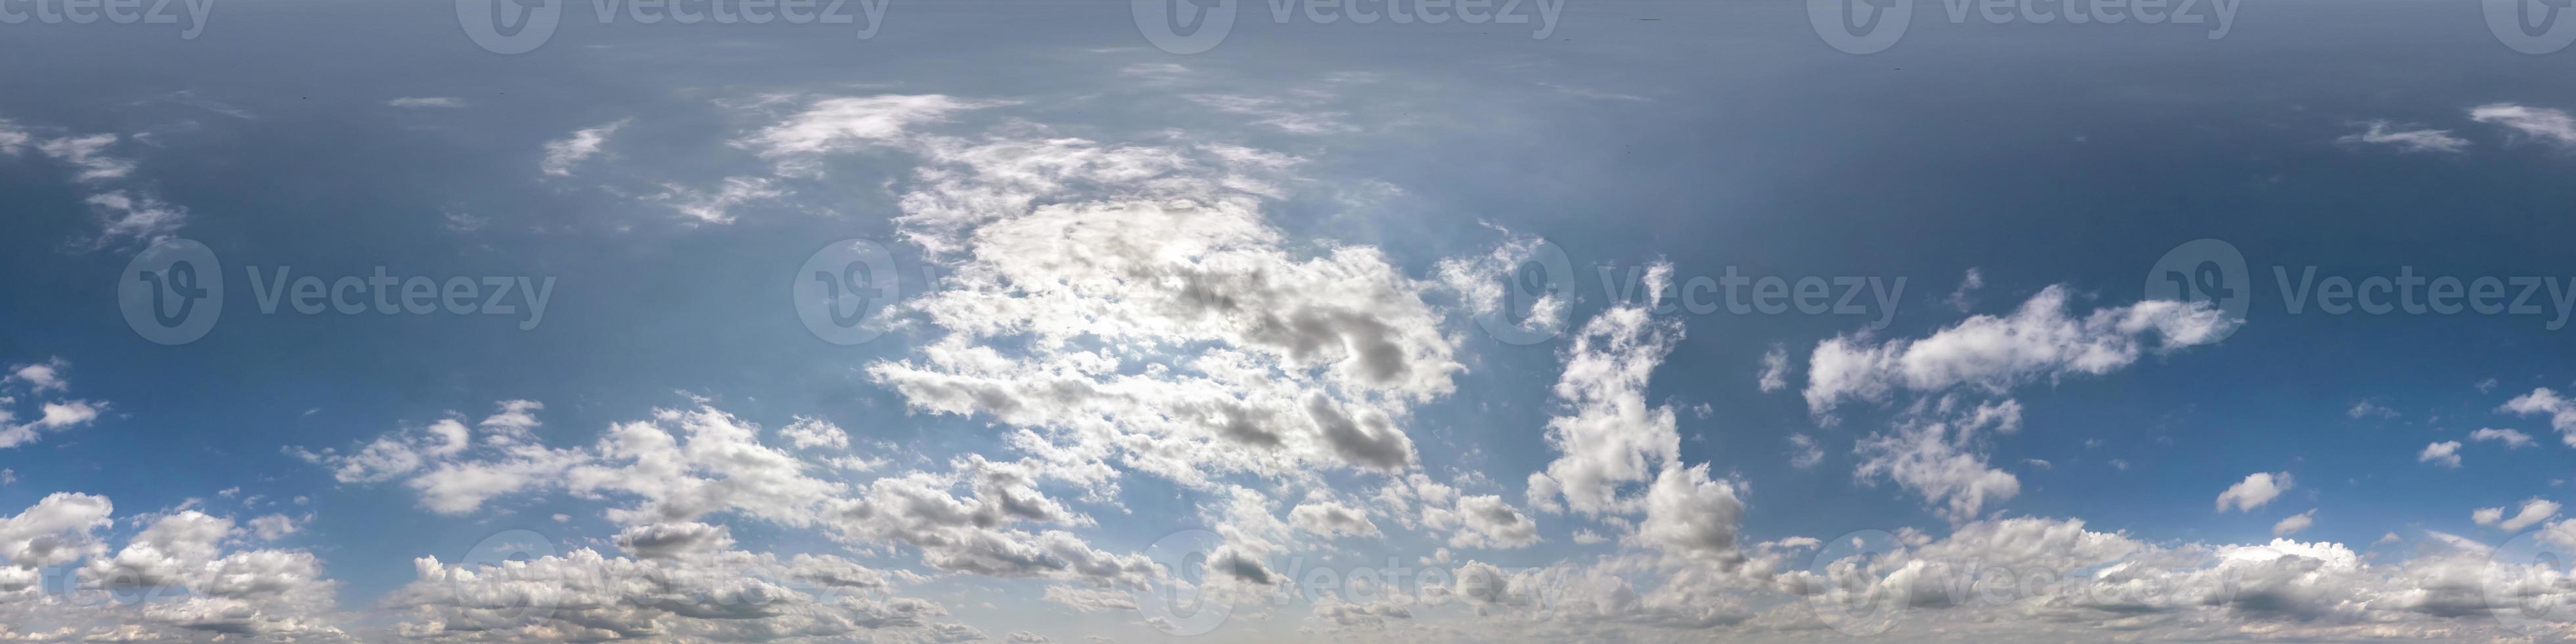 Seamless blue sky hdri panorama 360 degrees angle view with zenith and beautiful clouds for use in 3d graphics as sky dome or edit drone shot photo